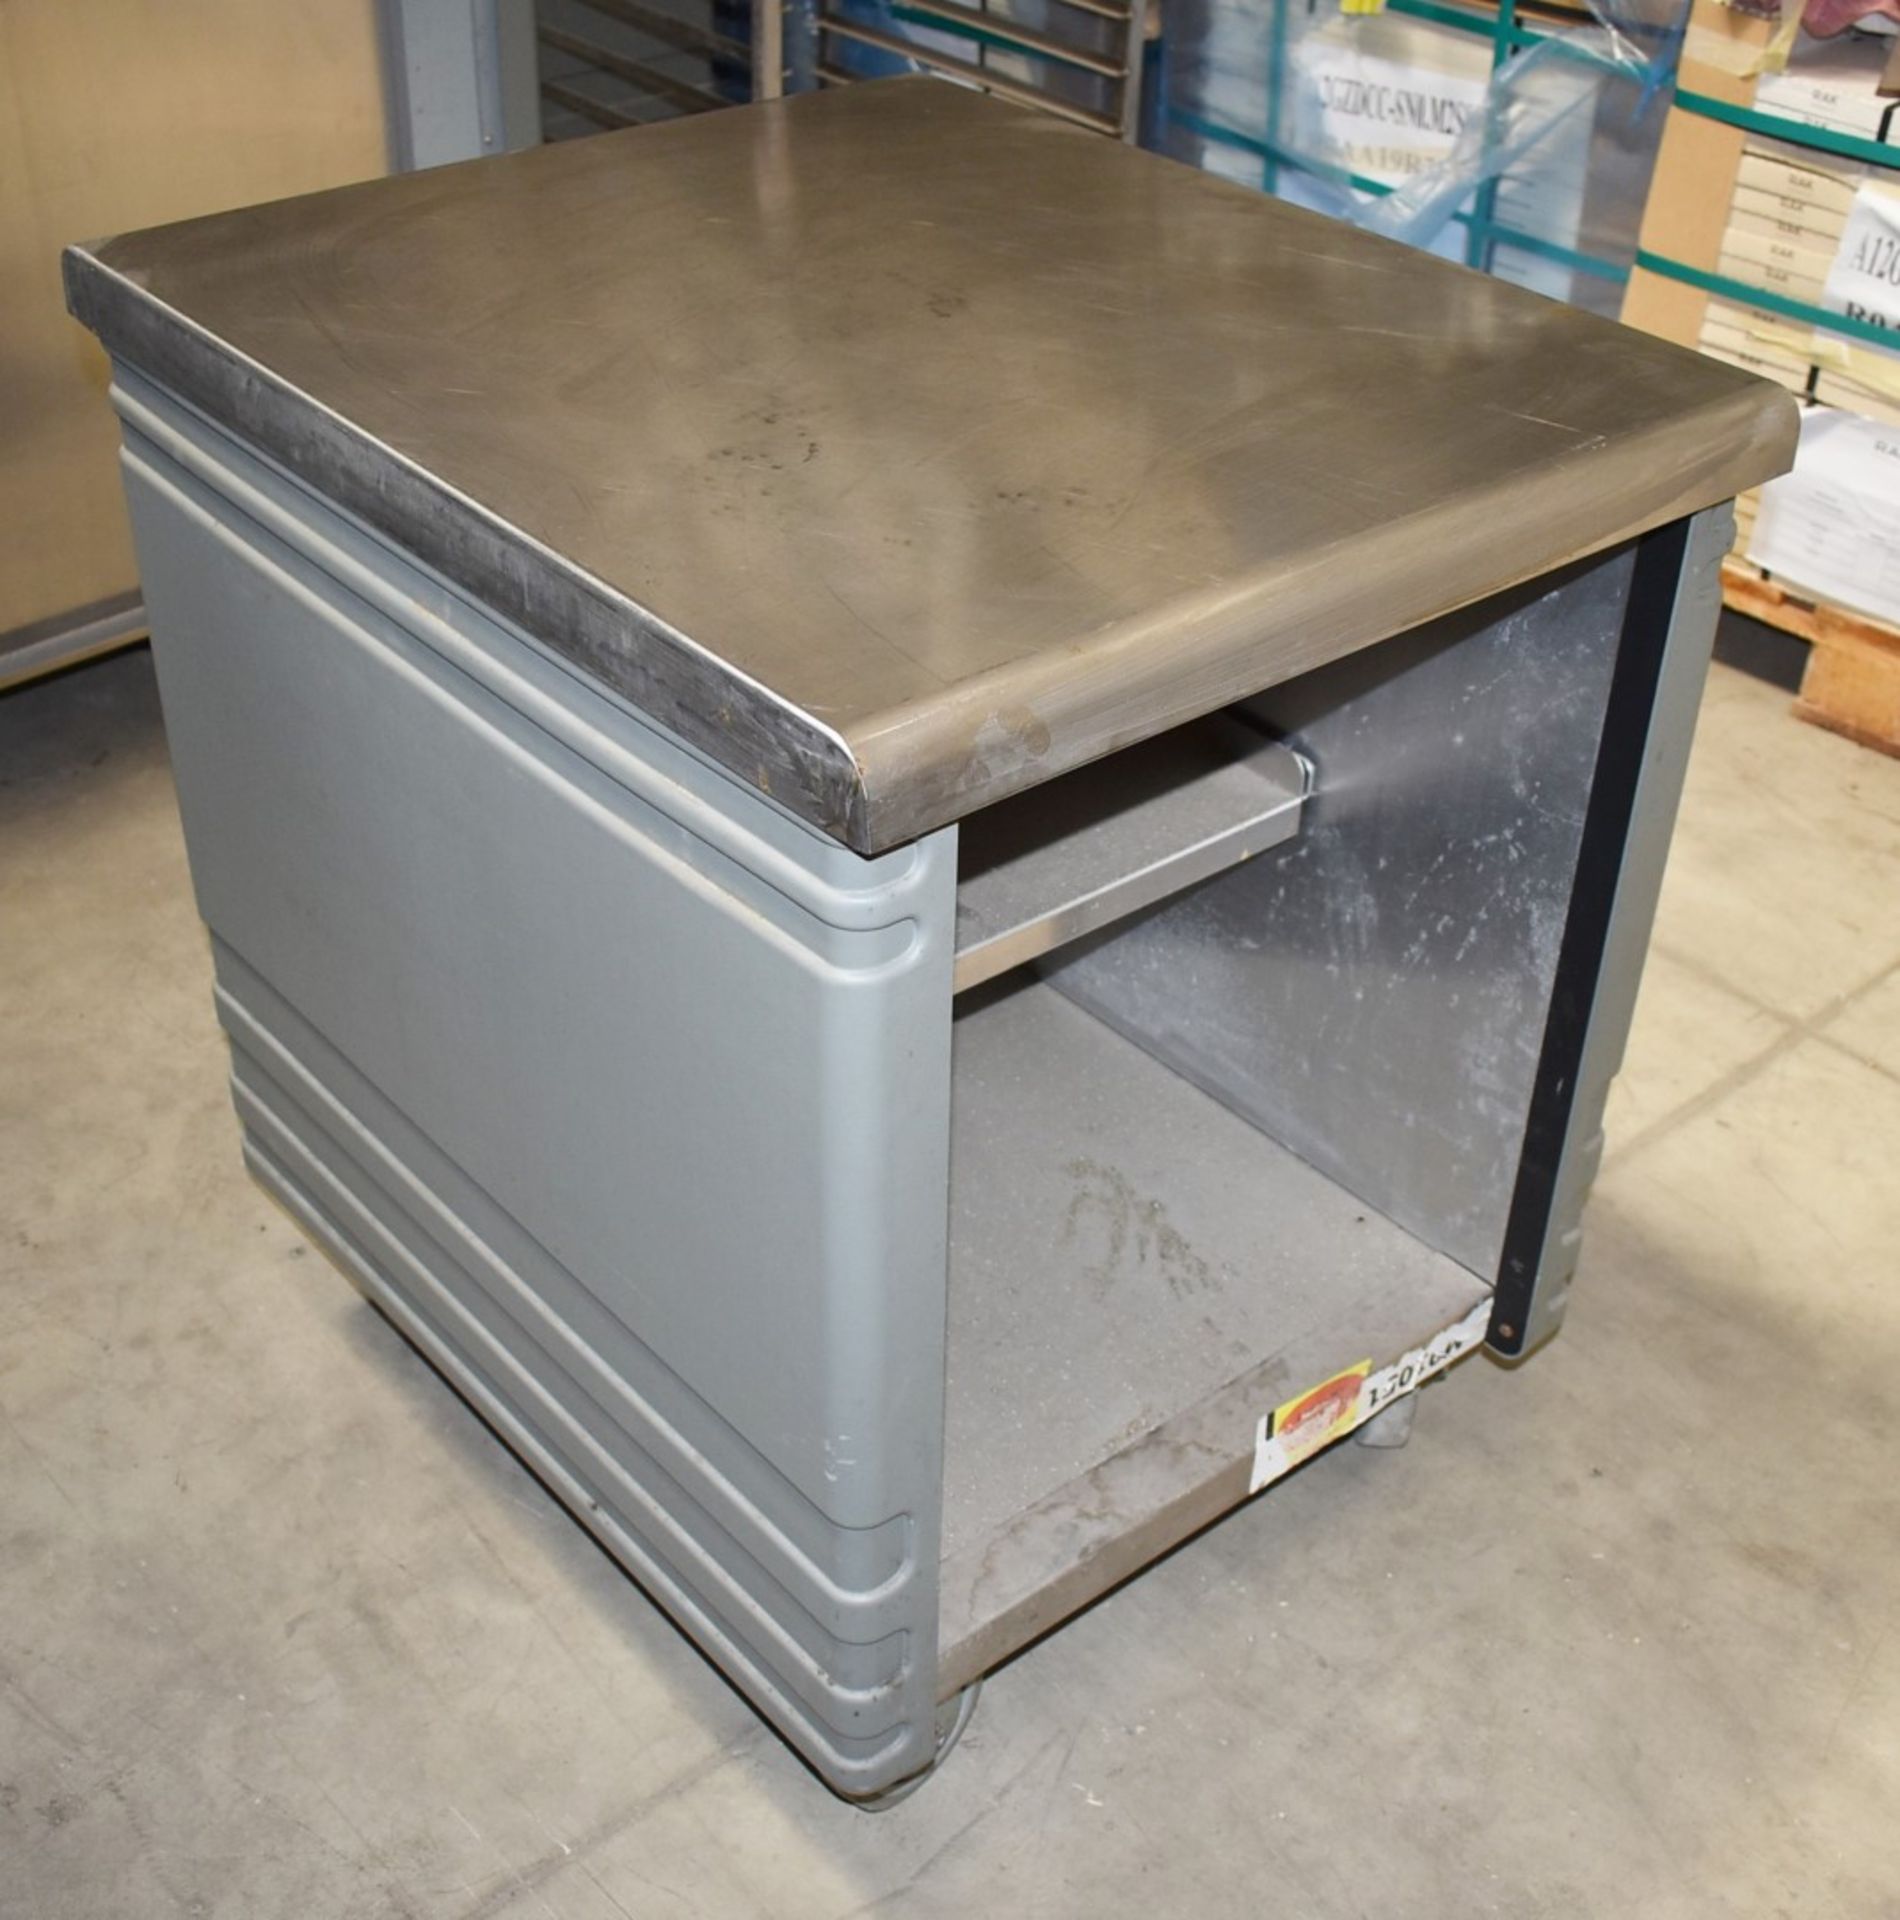 1 x Grundy Commercial Mobile Unit With Stainless Top, Plastic Side Protector Panels, Space to - Image 5 of 6